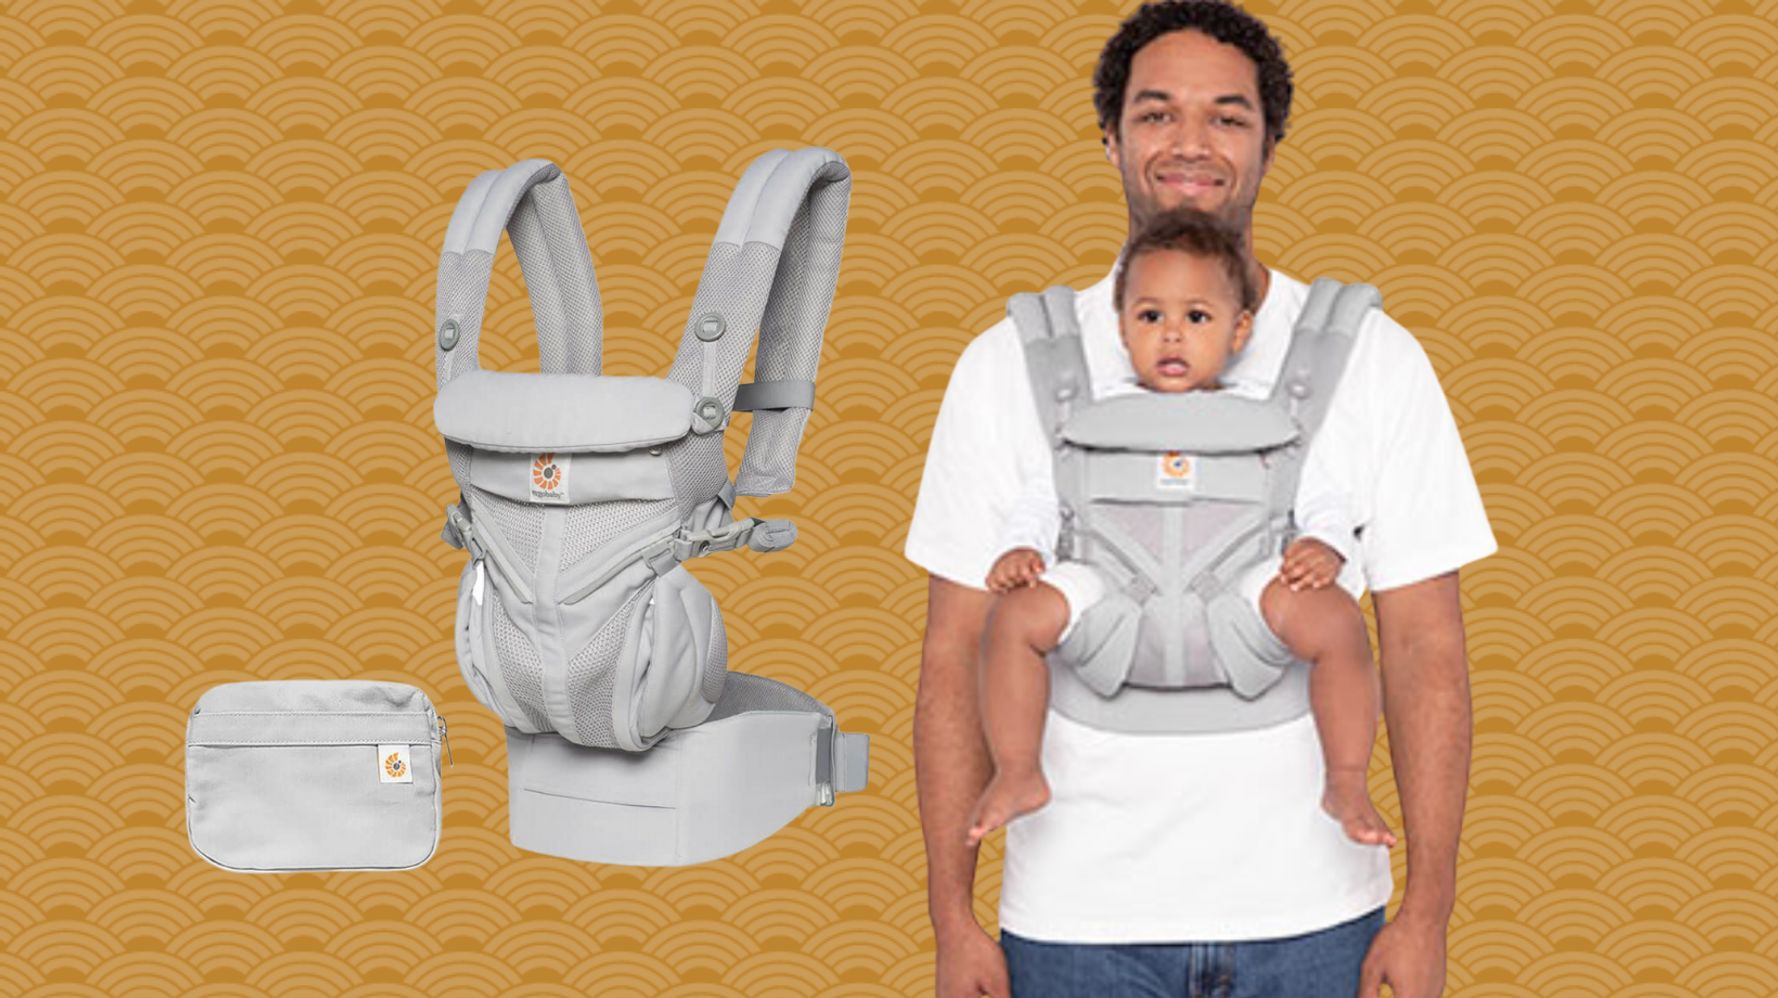 I Regret To Inform You That The Ergobaby Omni 360 Baby Carrier Outperforms  All Others